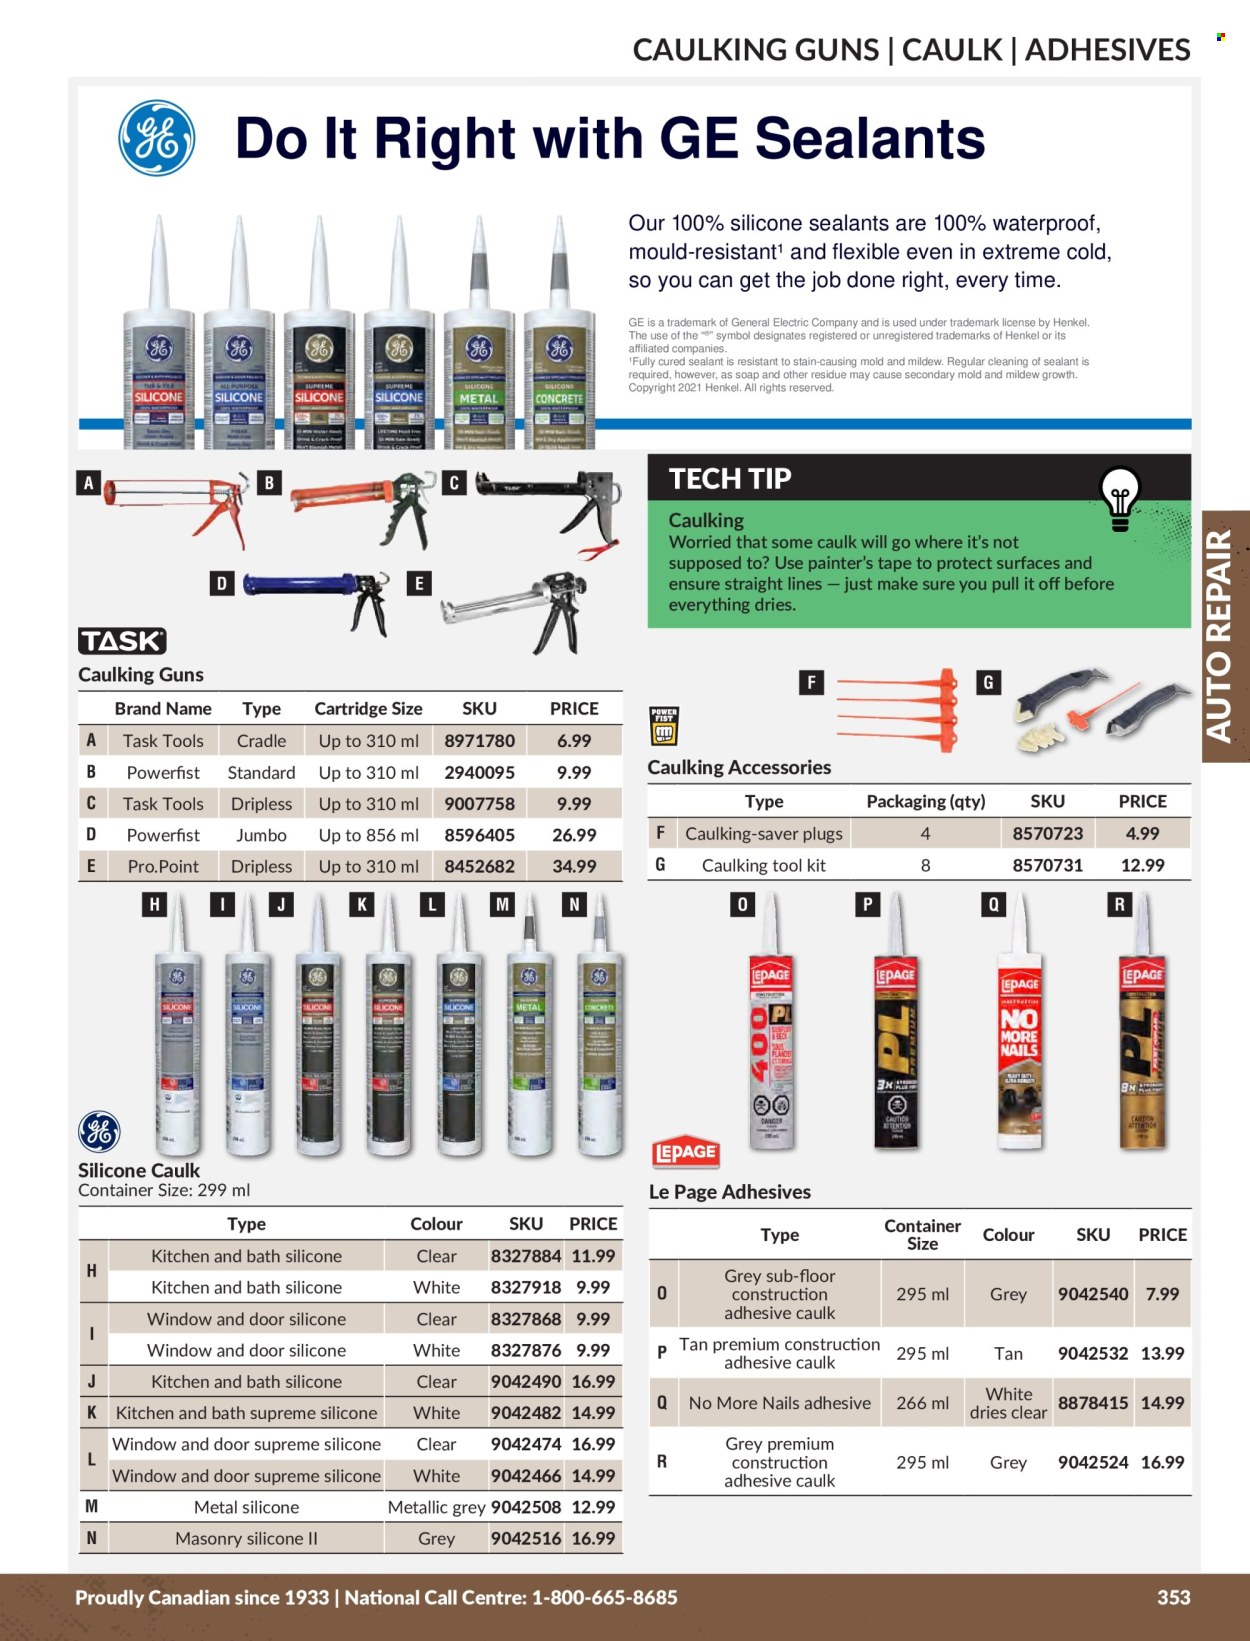 thumbnail - Princess Auto Flyer - Sales products - adhesive, silicone sealants, paint accessories, plug, tool set, container. Page 357.